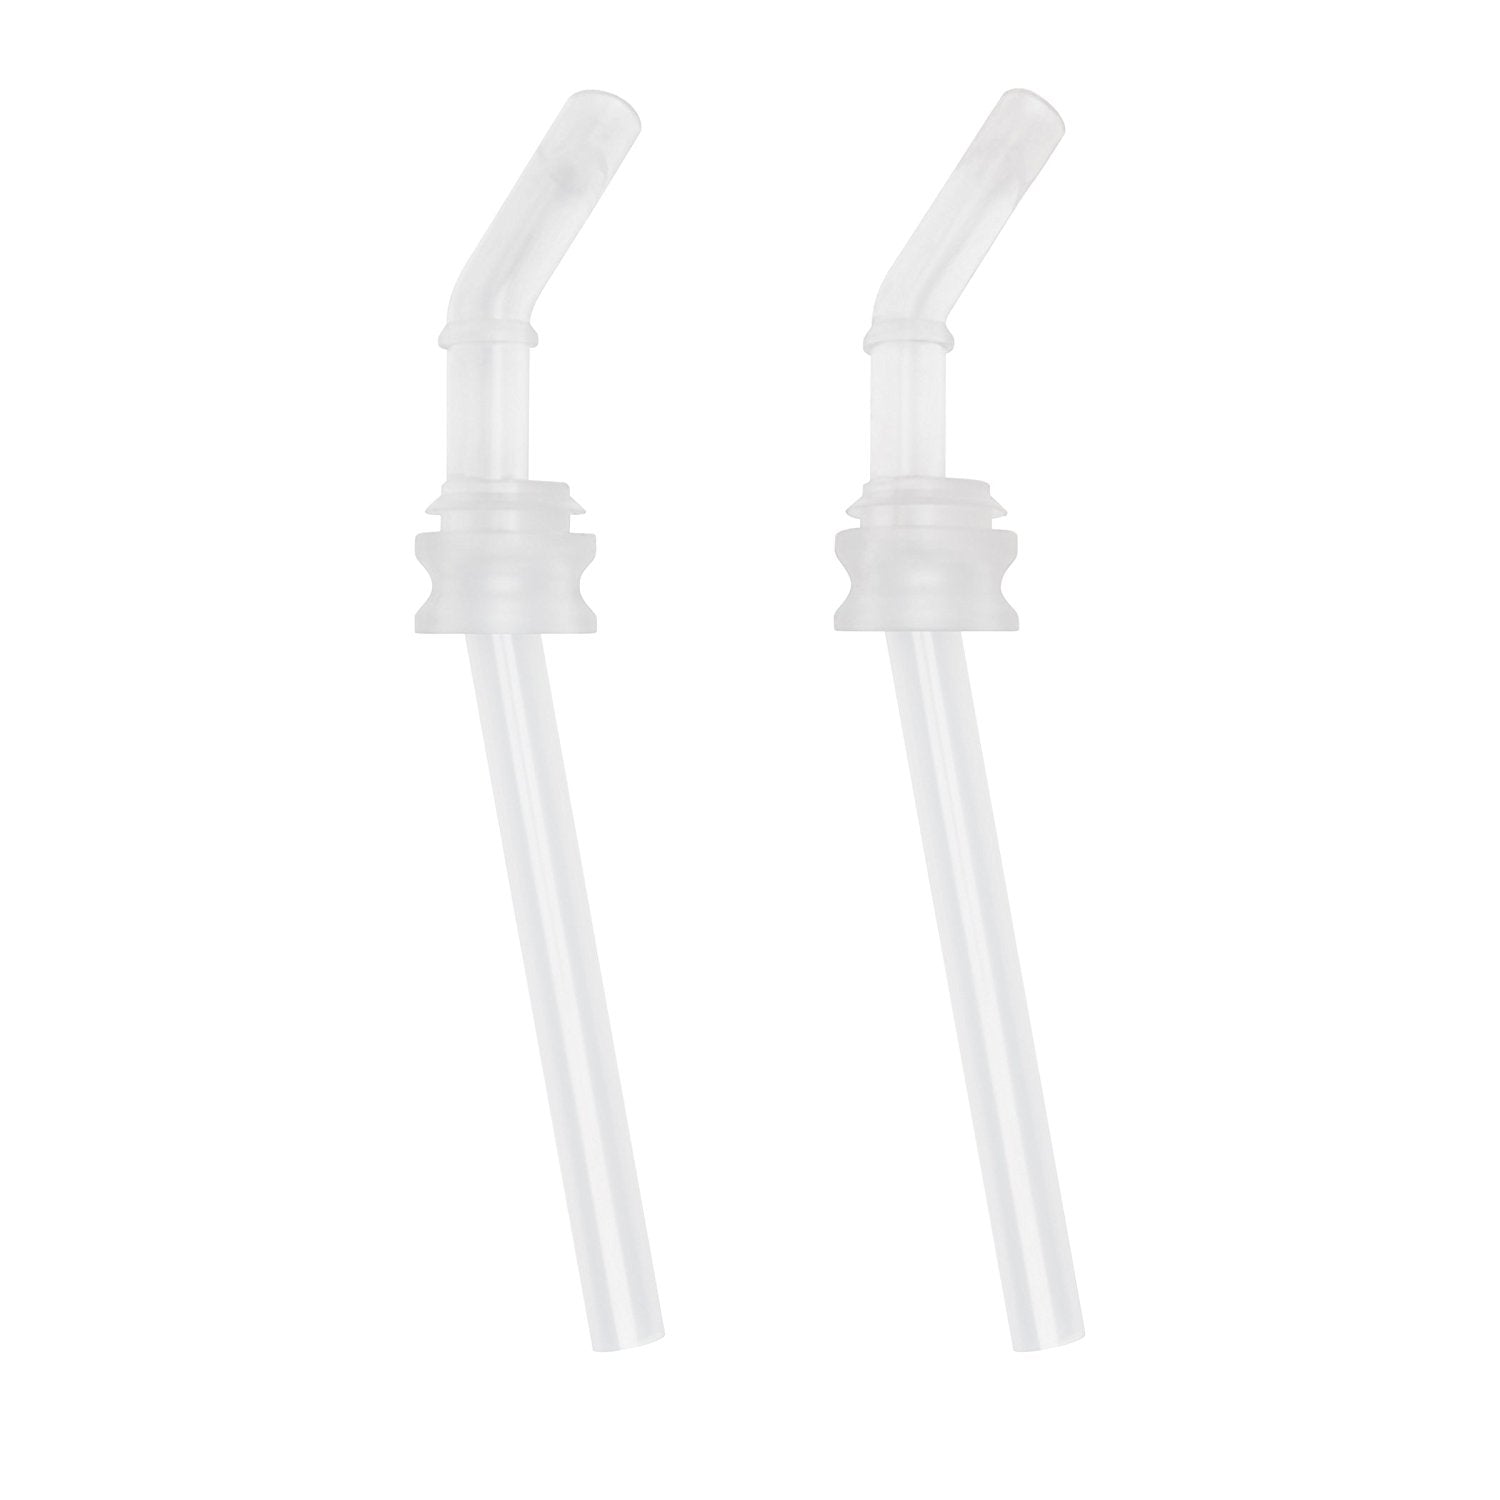 Replacement Straws for 9 Ounce Straw Cup (2 Pack) uniq